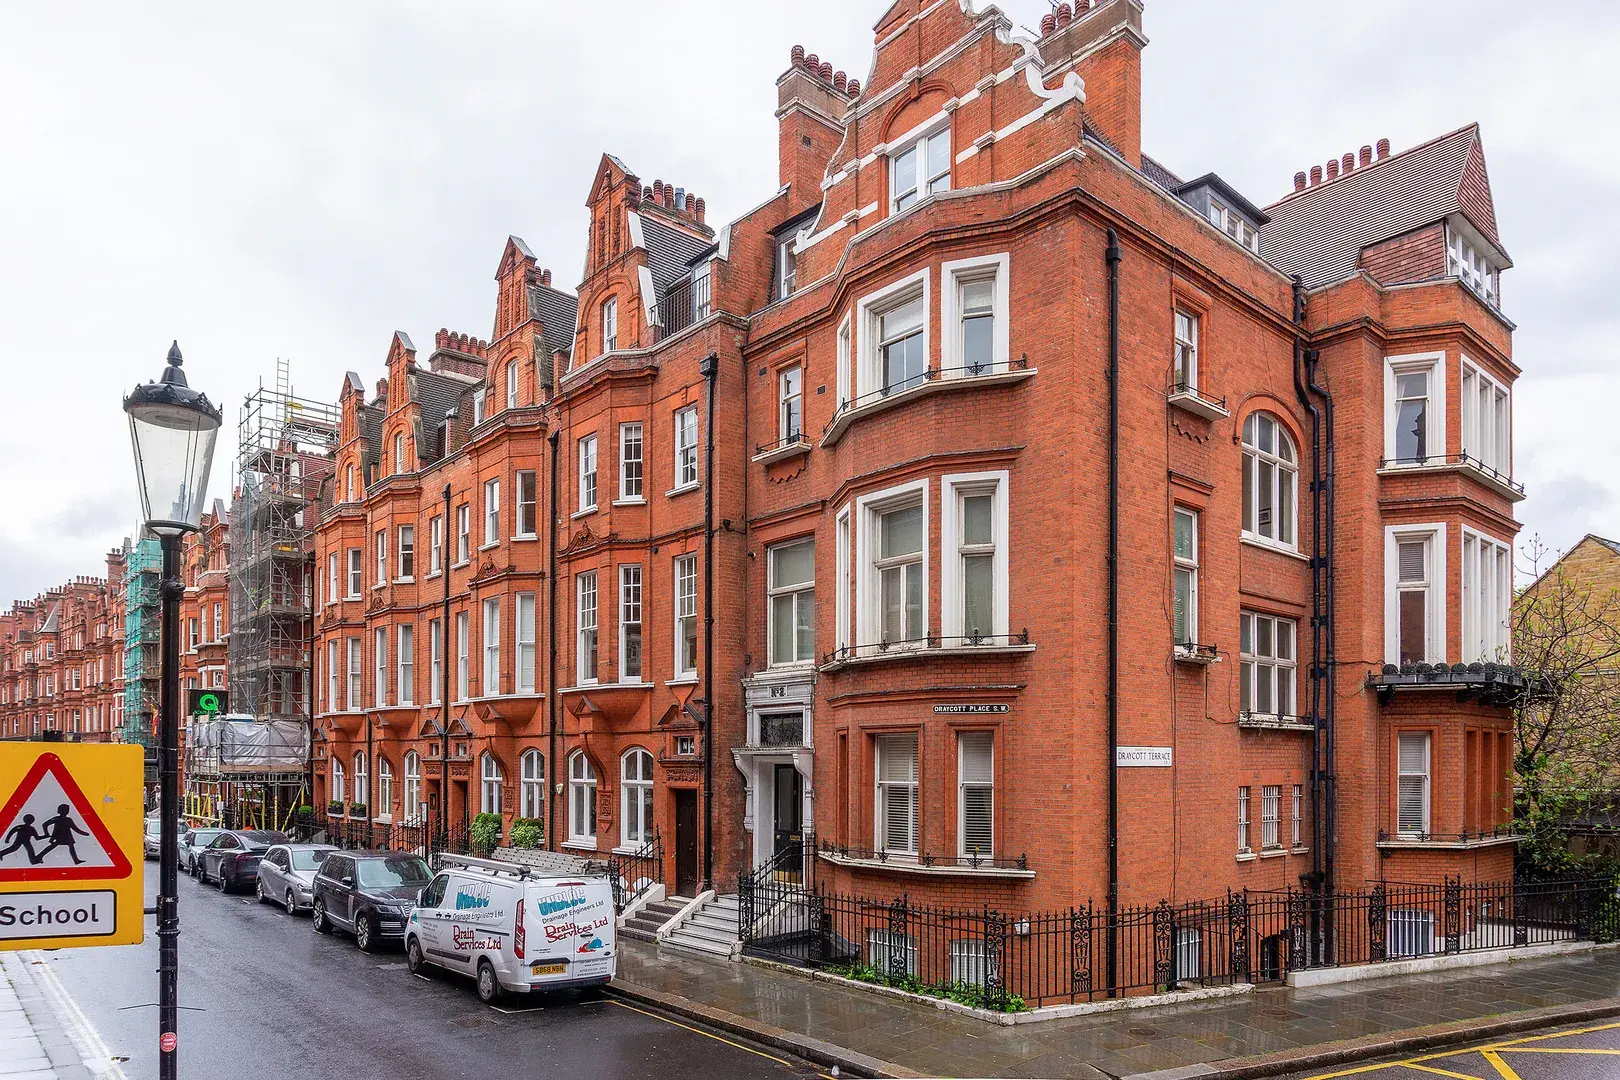 Draycott Place, holiday home in Chelsea, London